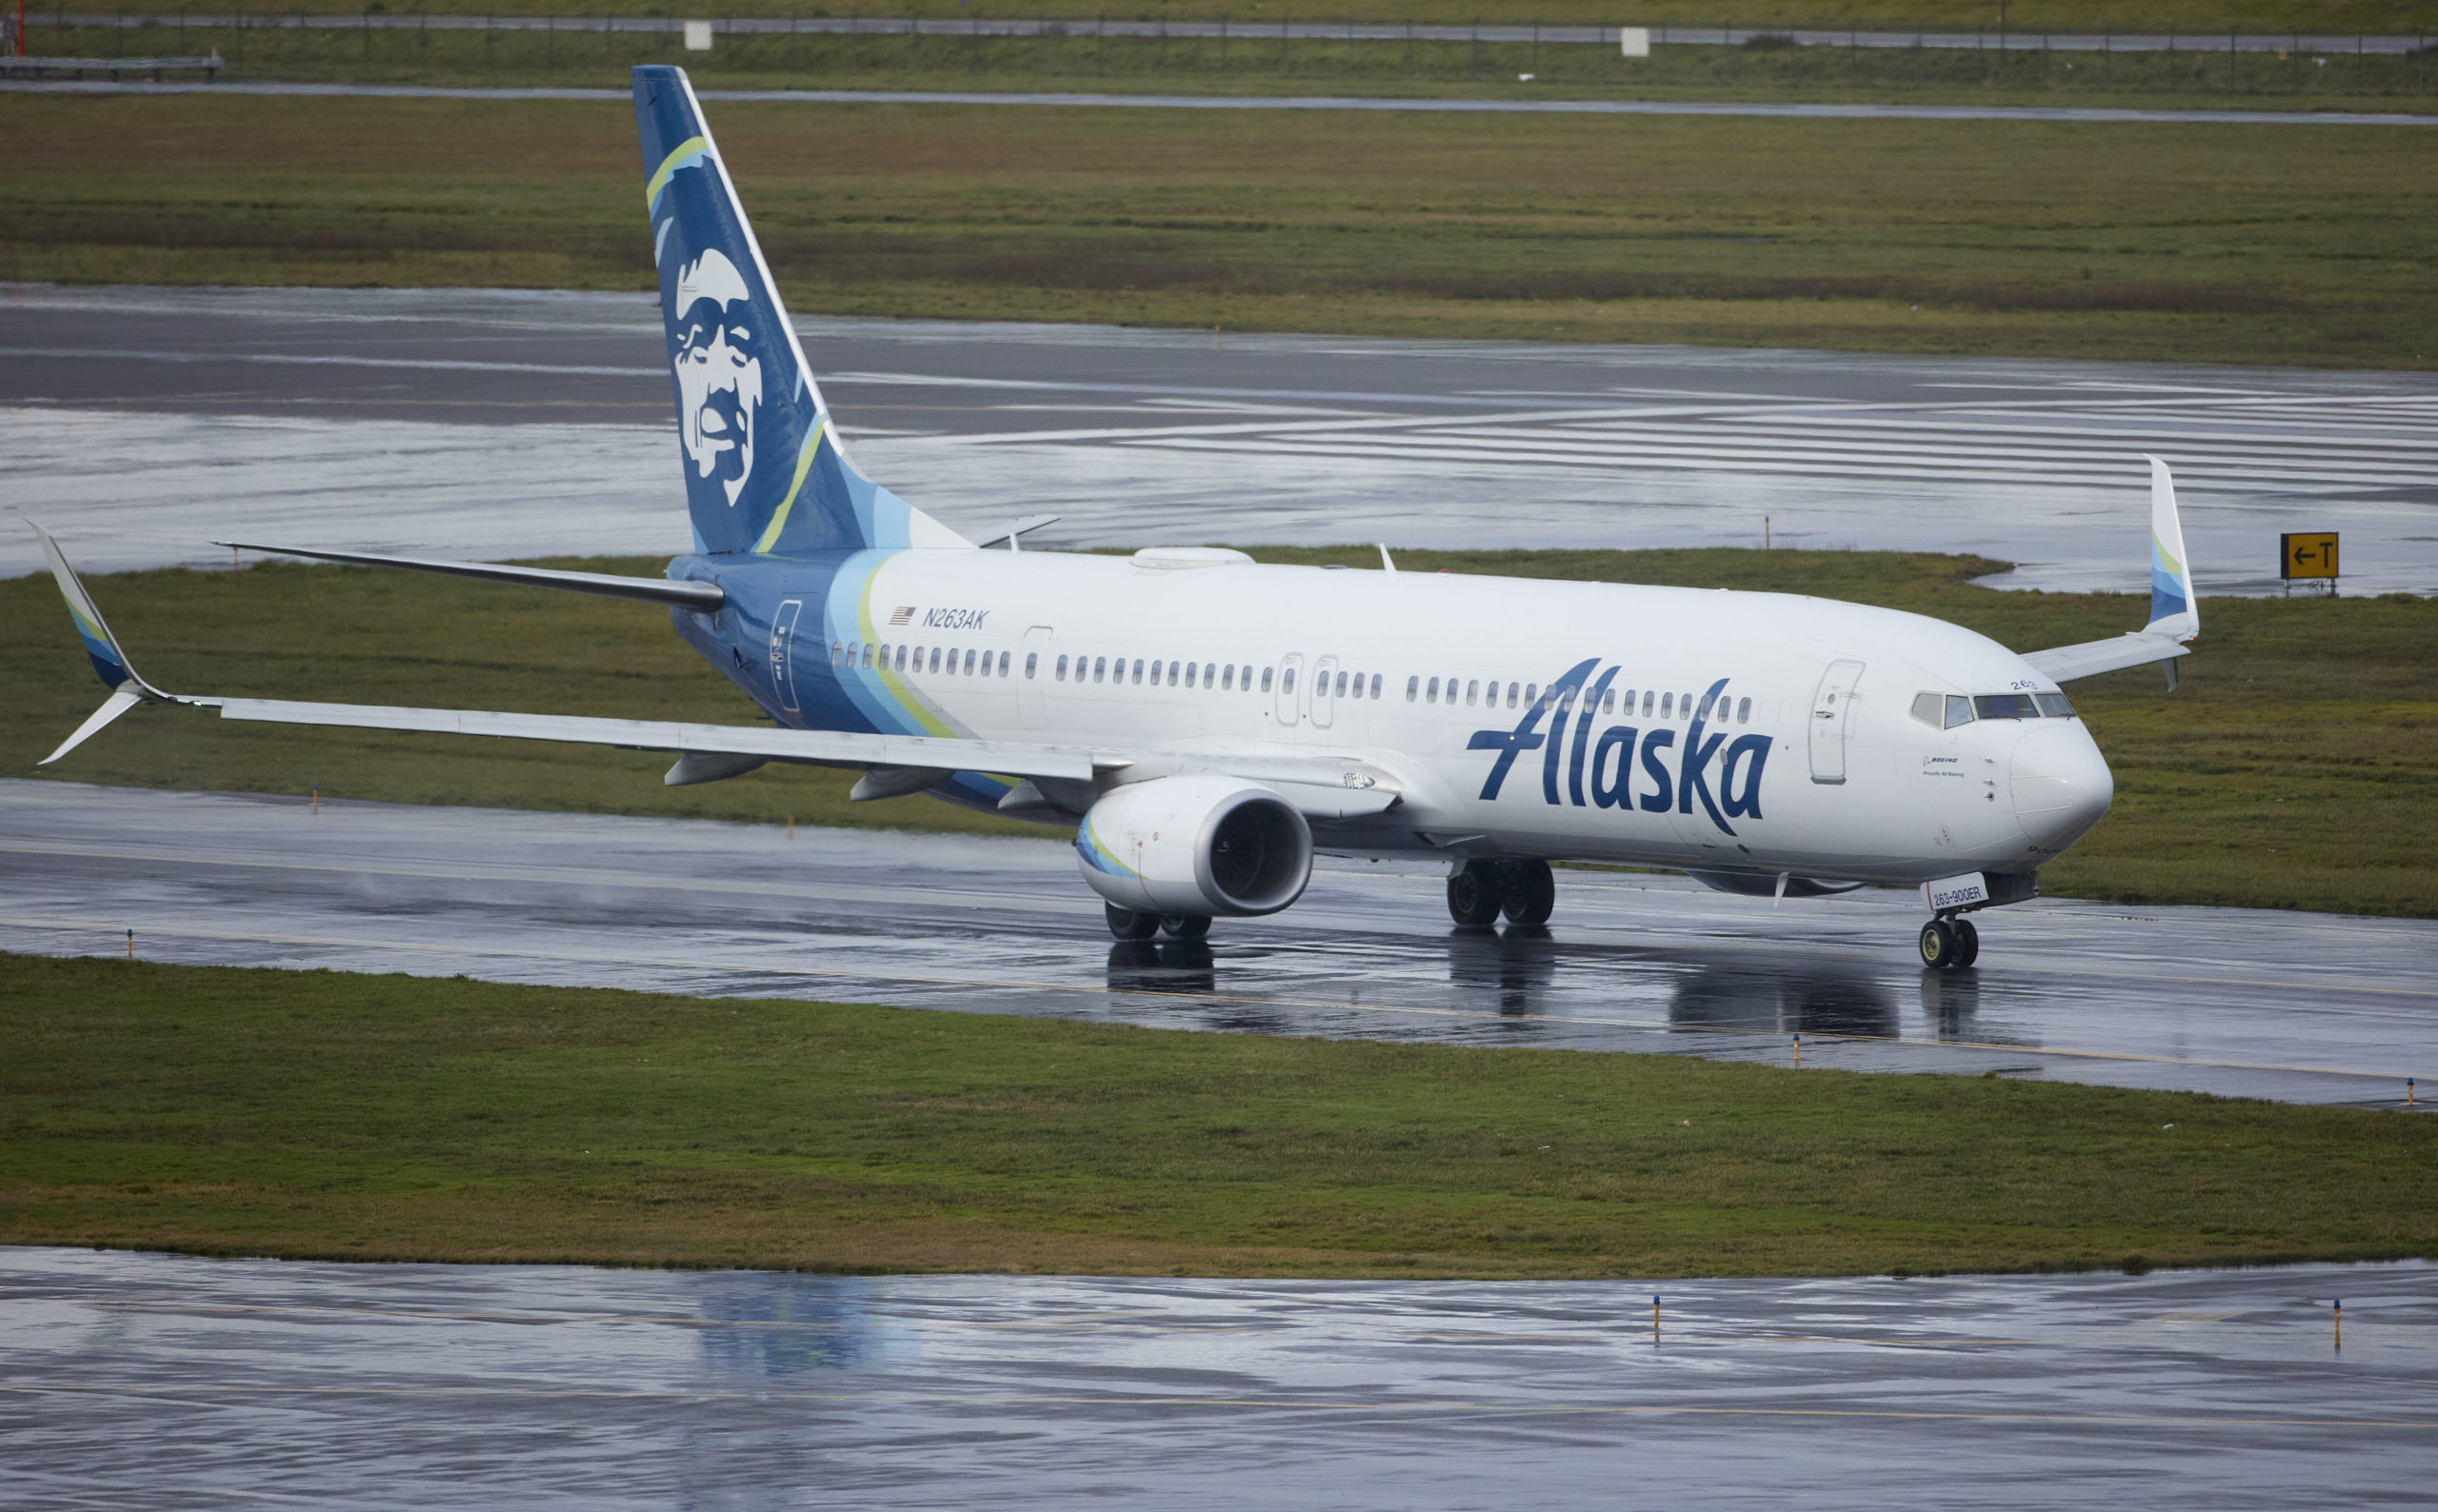 Alaska Airlines flight 1276, a Boeing 737 Max 9, taxis before taking off at Portland International Airport in Portland, Oregon, on Saturday.